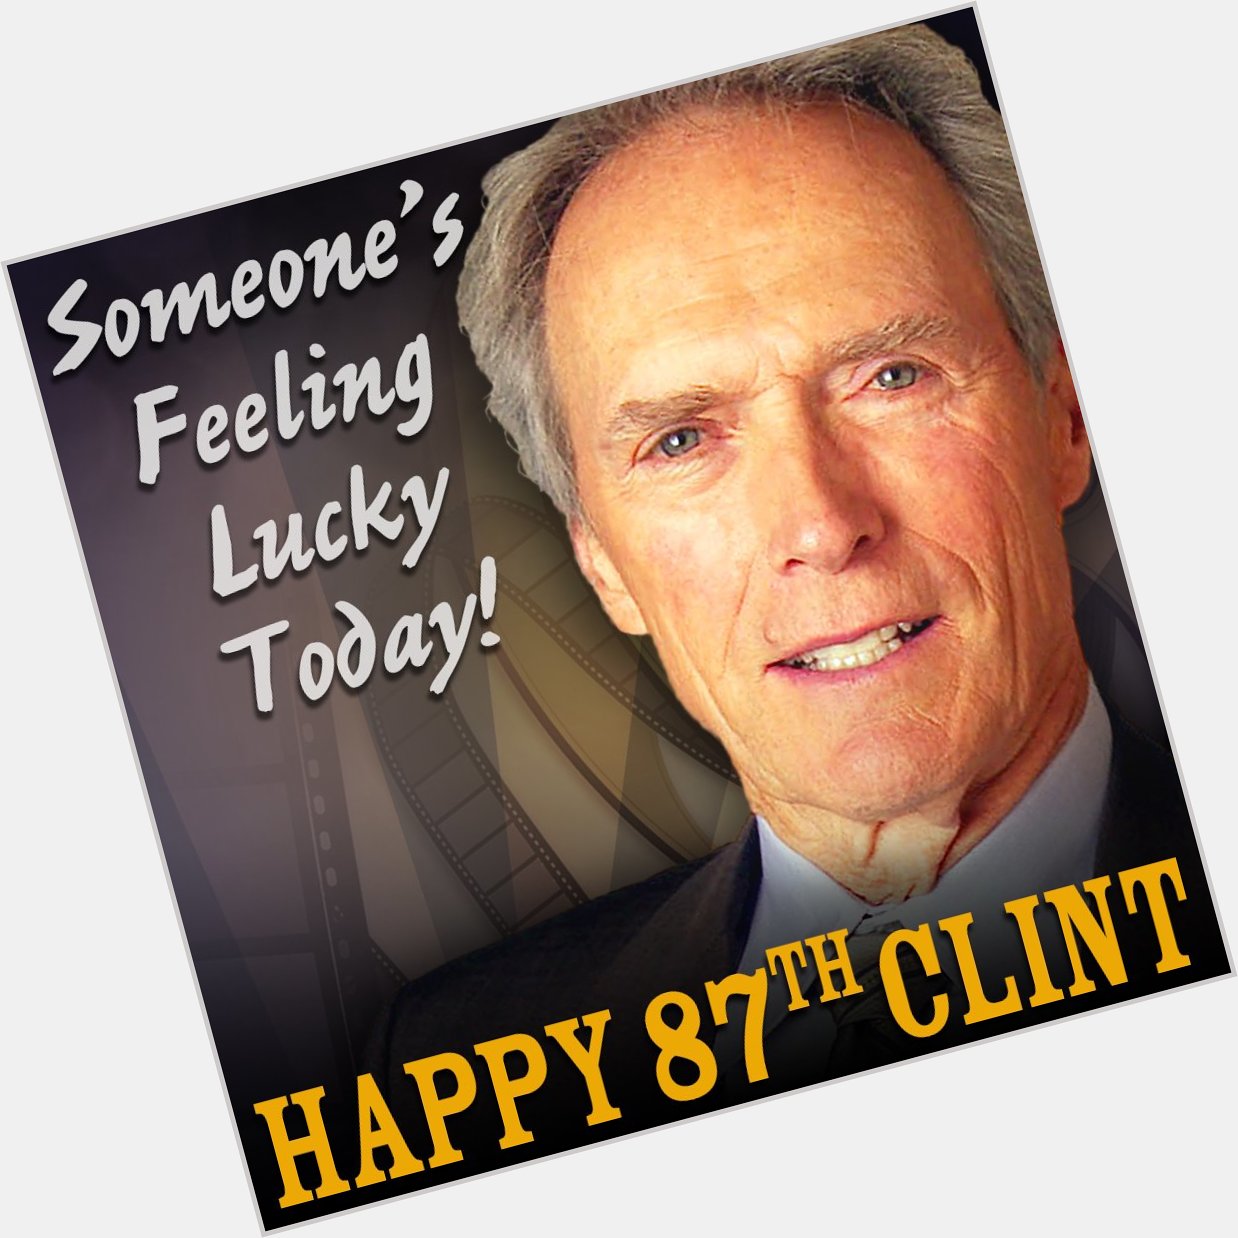 Happy birthday to Clint Eastwood who turns 87 today! 